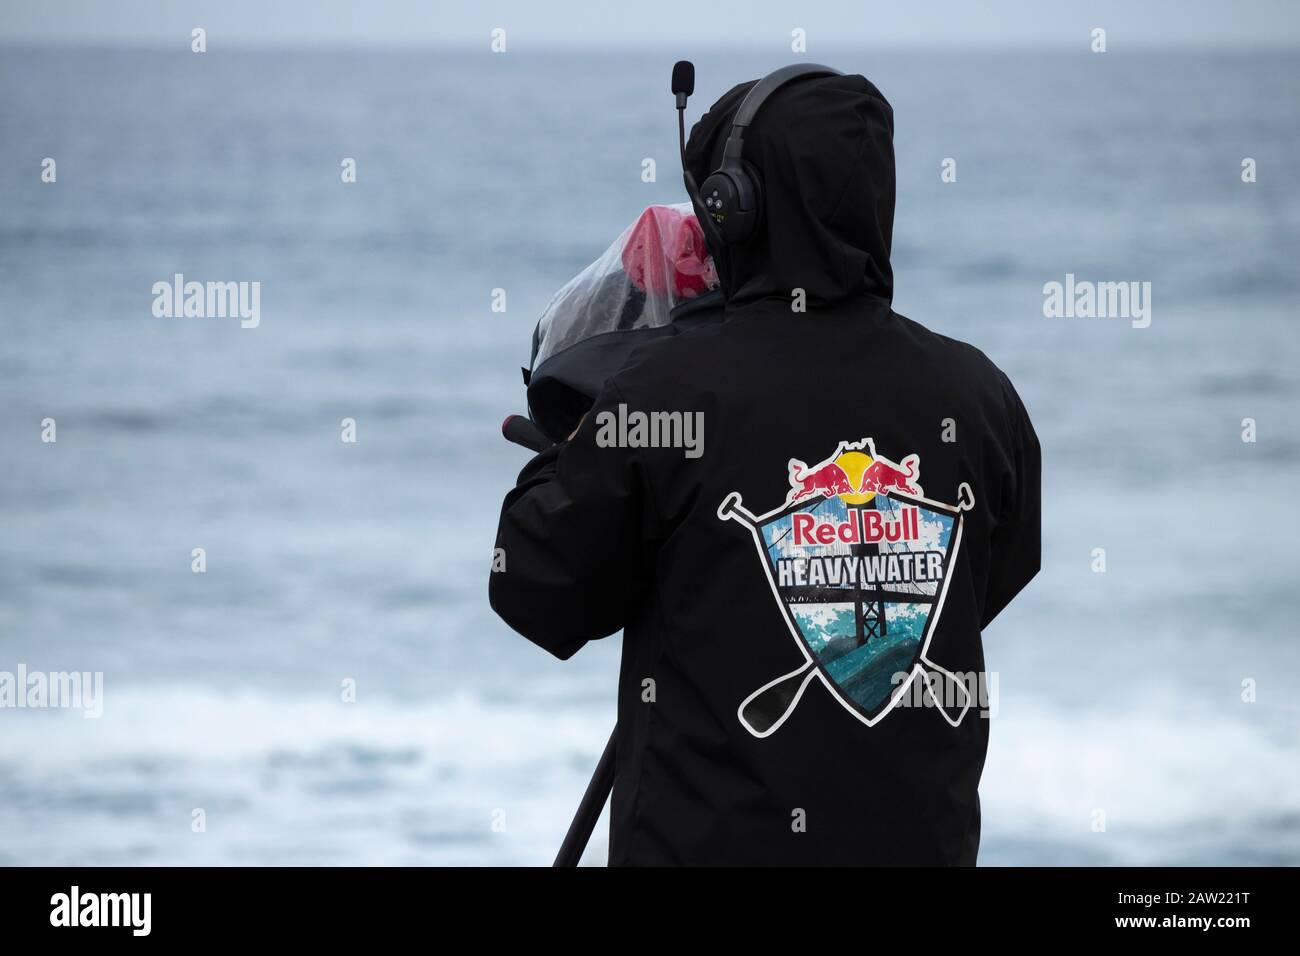 Cameraman live streaming Red Bull sponsered surfing competition Stock Photo